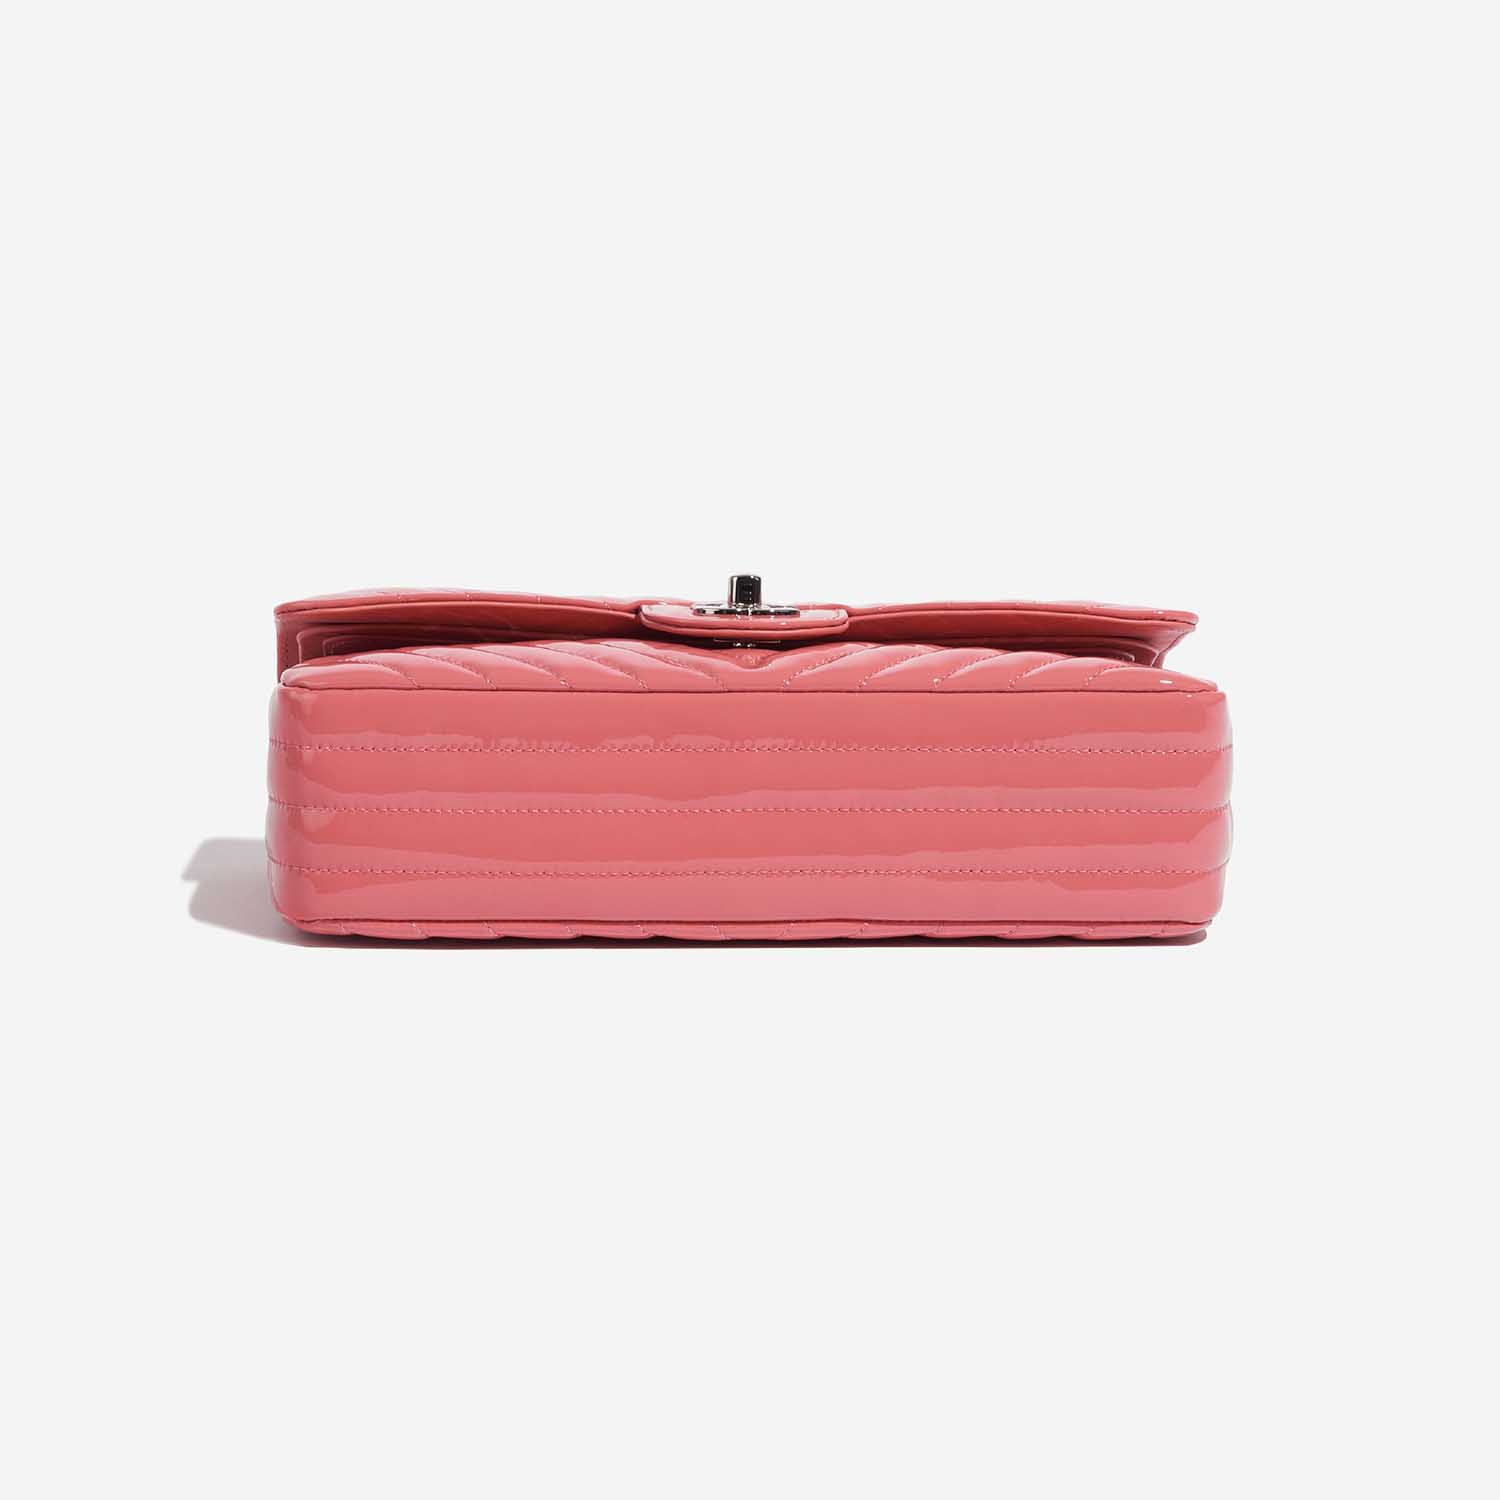 Pre-owned Chanel bag Timeless Medium Patent Pink Pink Bottom | Sell your designer bag on Saclab.com